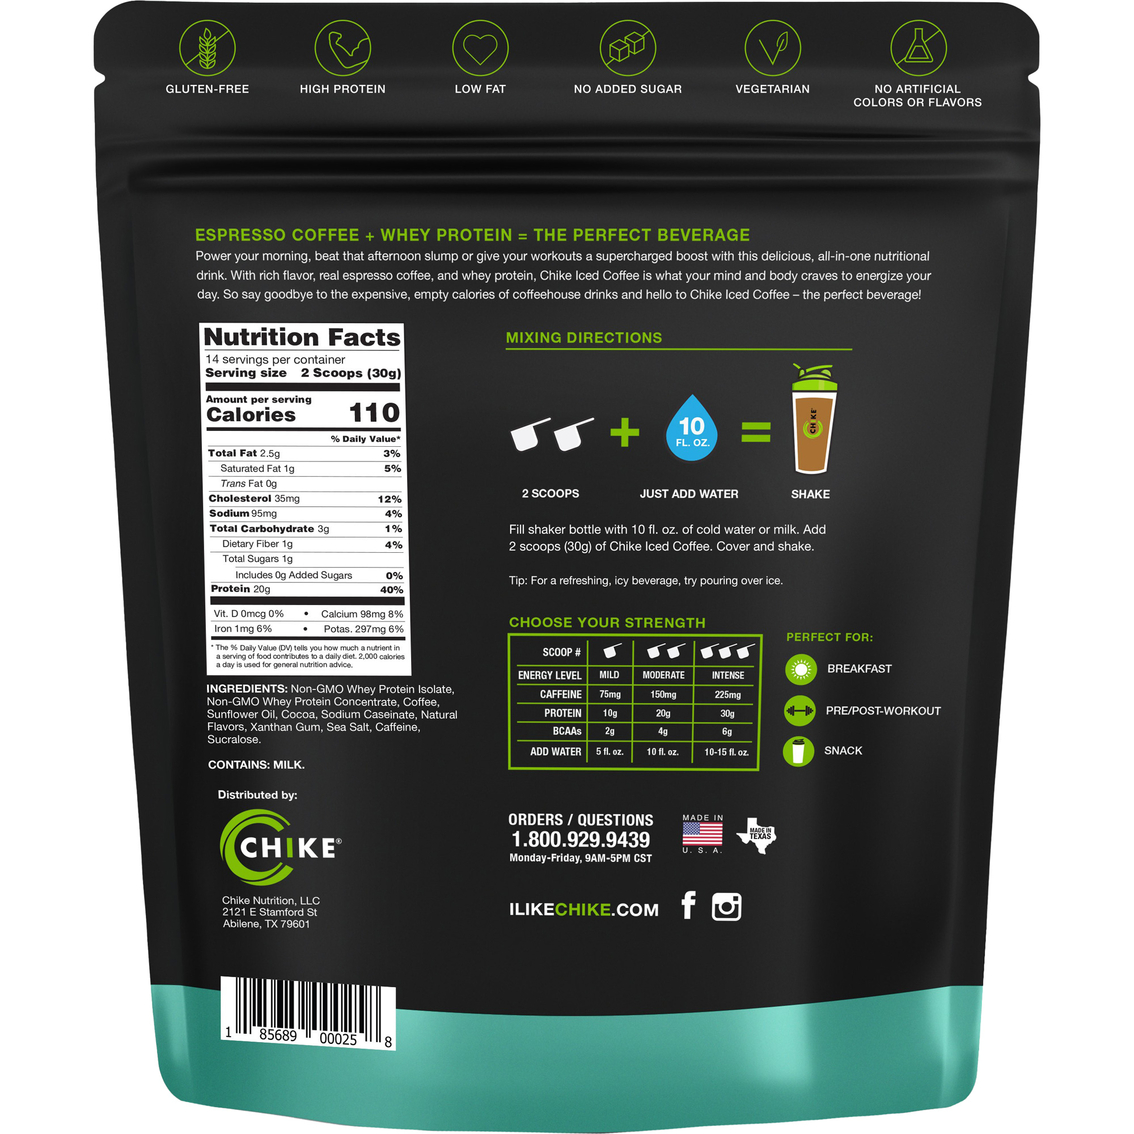 Chike High Protein Iced Coffee 14 Servings - Image 2 of 2